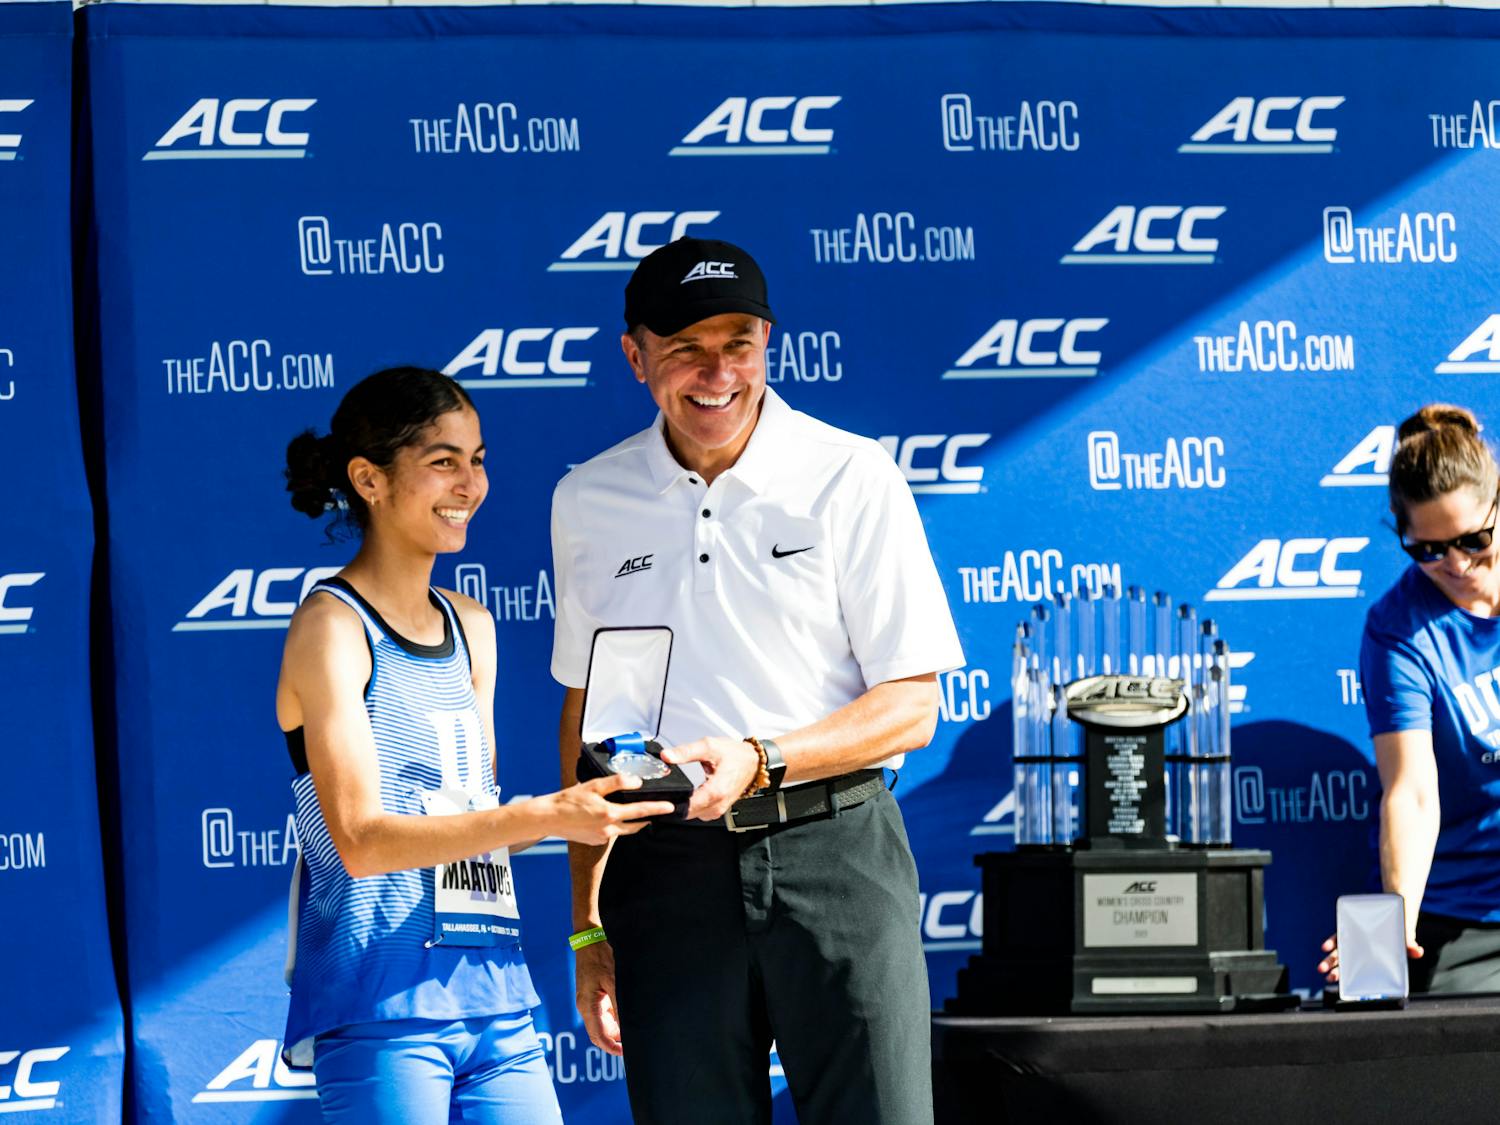 Amina Maatoug receives her silver medal after placing second at the ACC Championships.